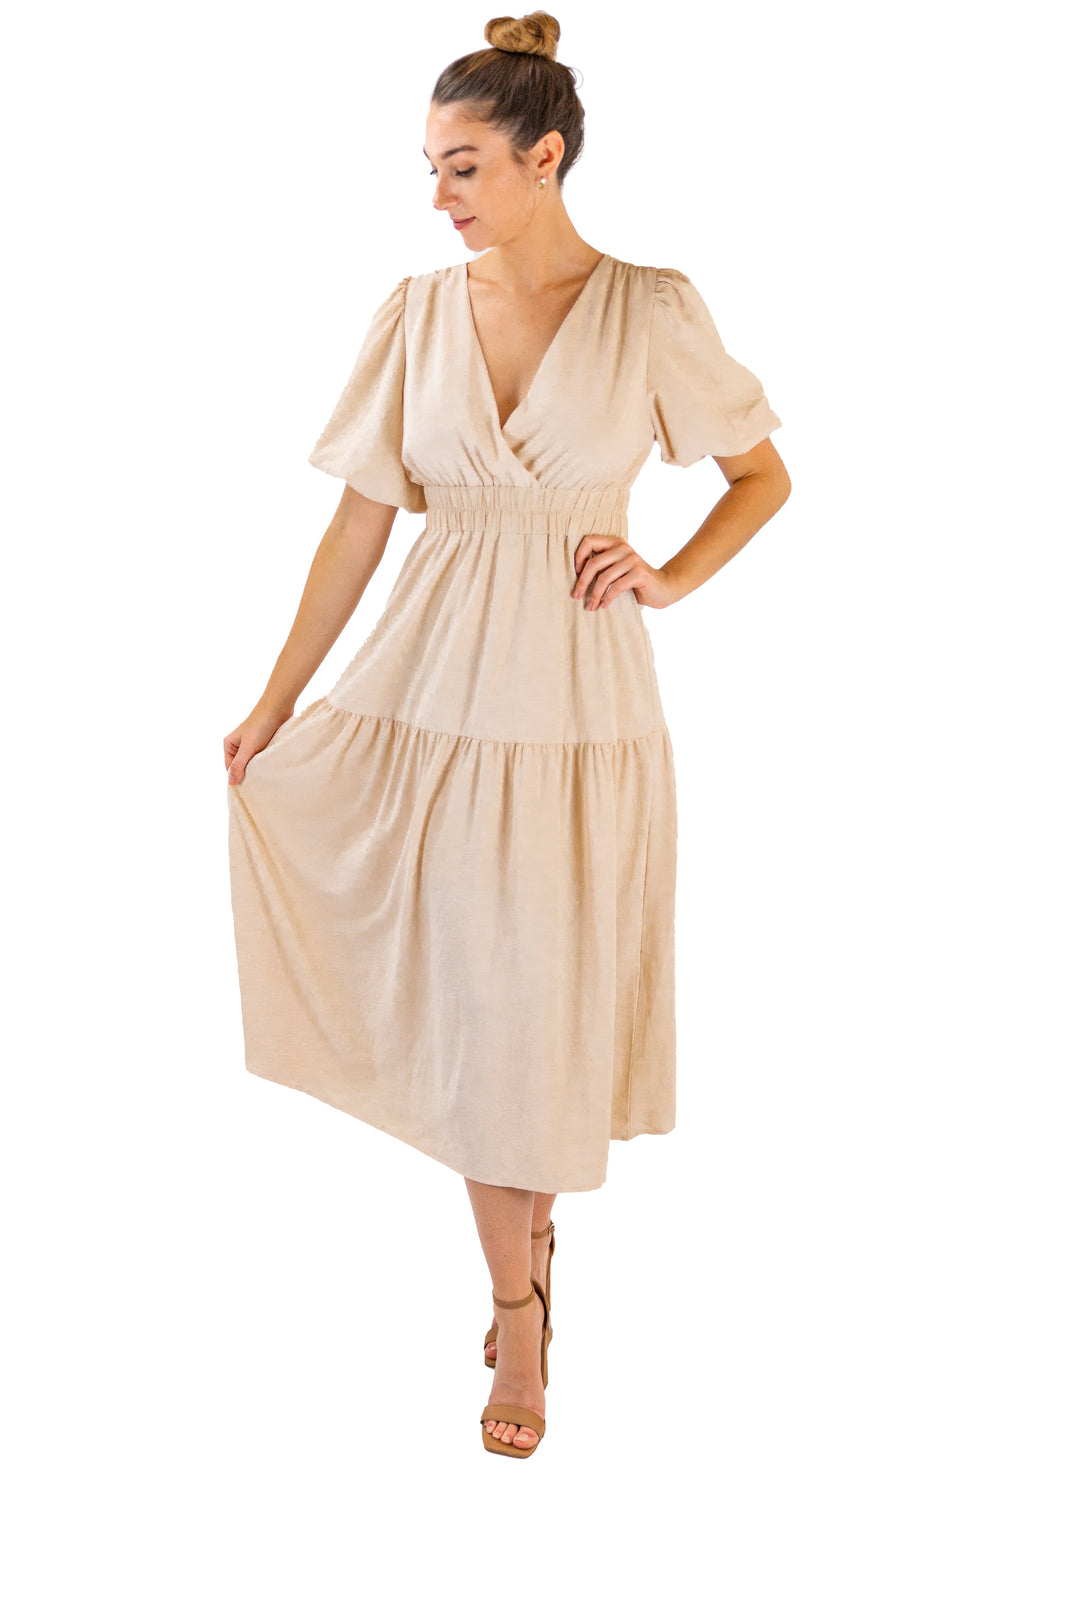 Elegant Beige Tiered Midi Dress with Puffed Sleeves by Fabonics in Graceful Radiance Style